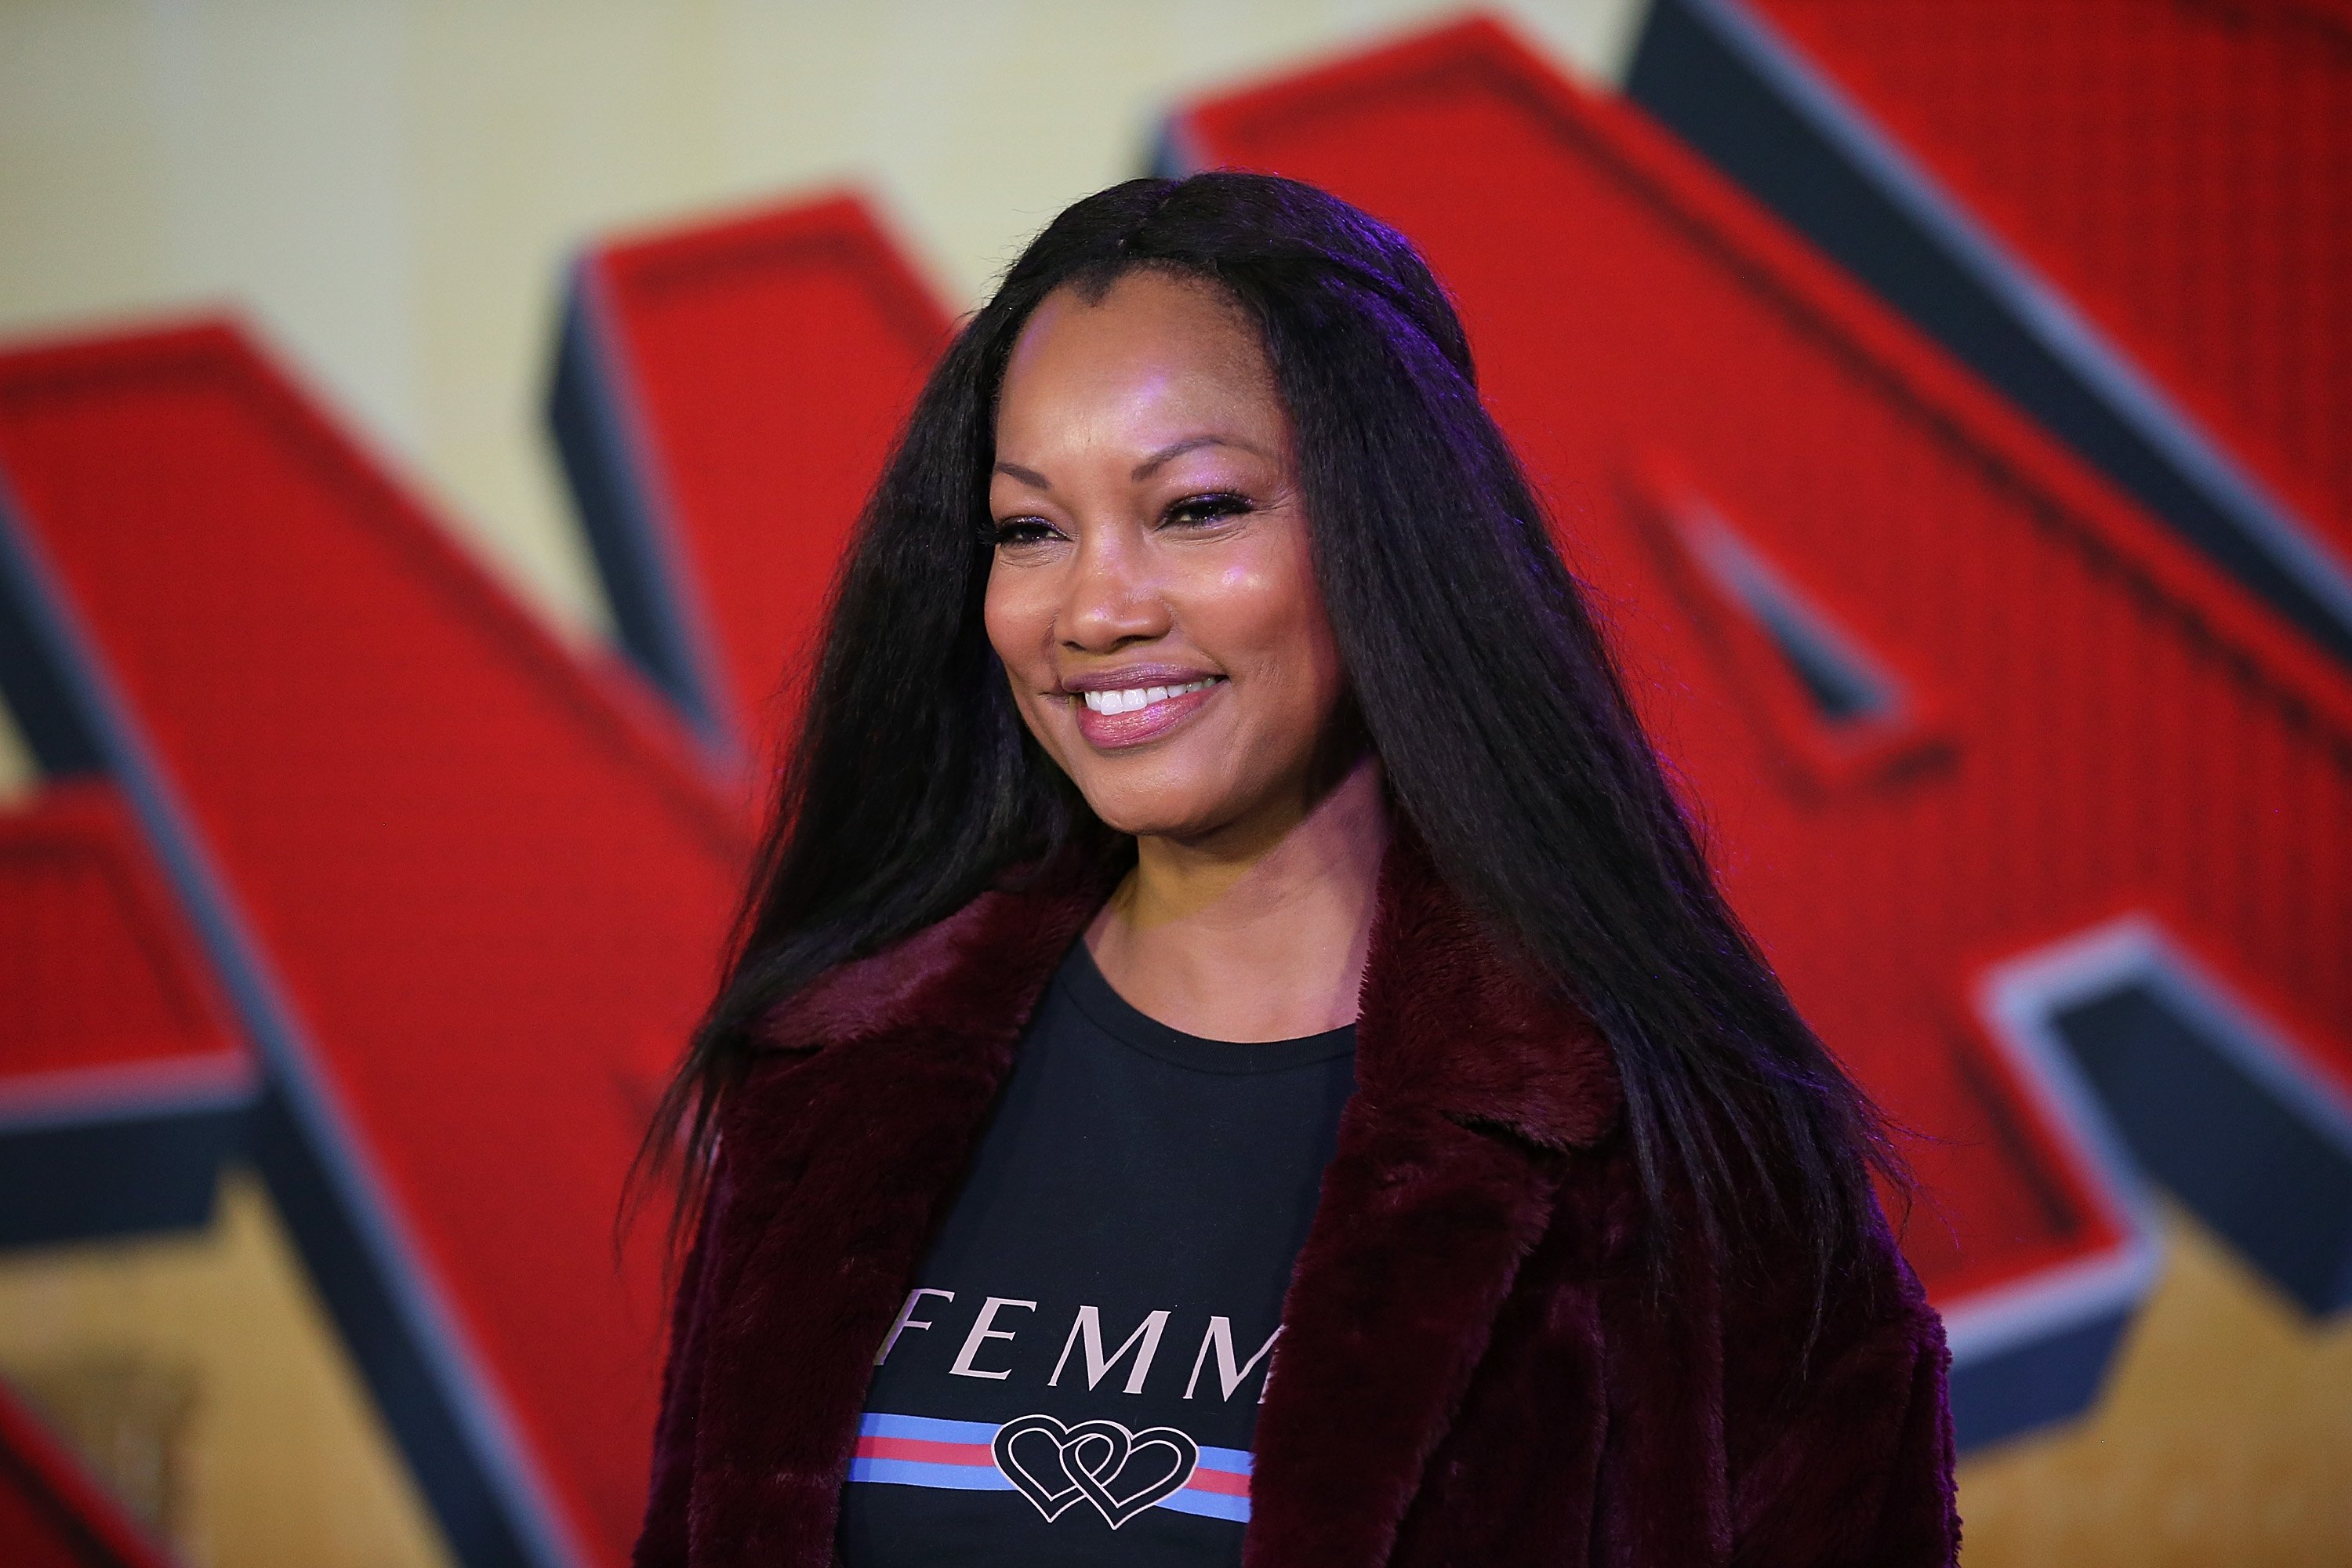 Garcelle Beauvais at the world premiere of "Spider-Man: Into The Spider-Verse" on Dec. 1, 2018 in California | Photo: Getty Images